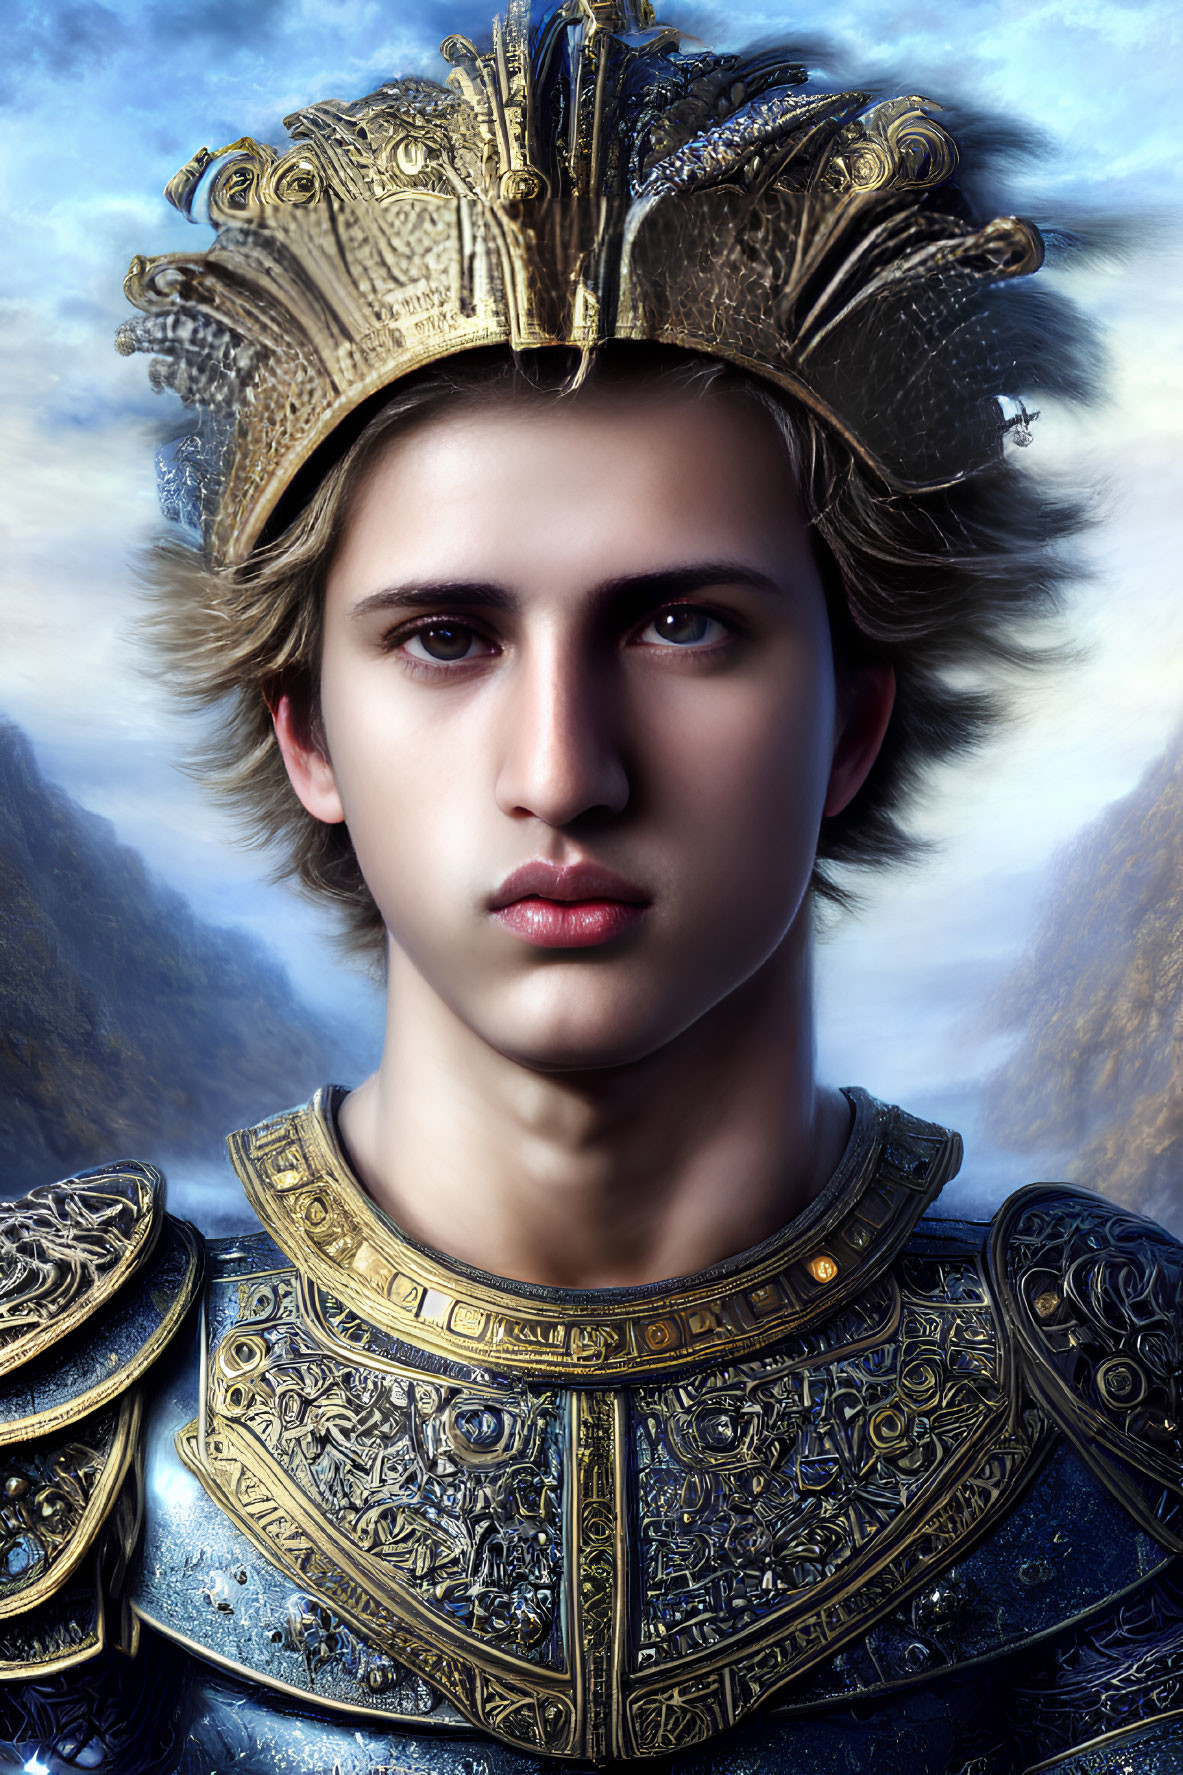 Digital Artwork: Young Person in Golden Crown and Blue Armor against Mountainous Background